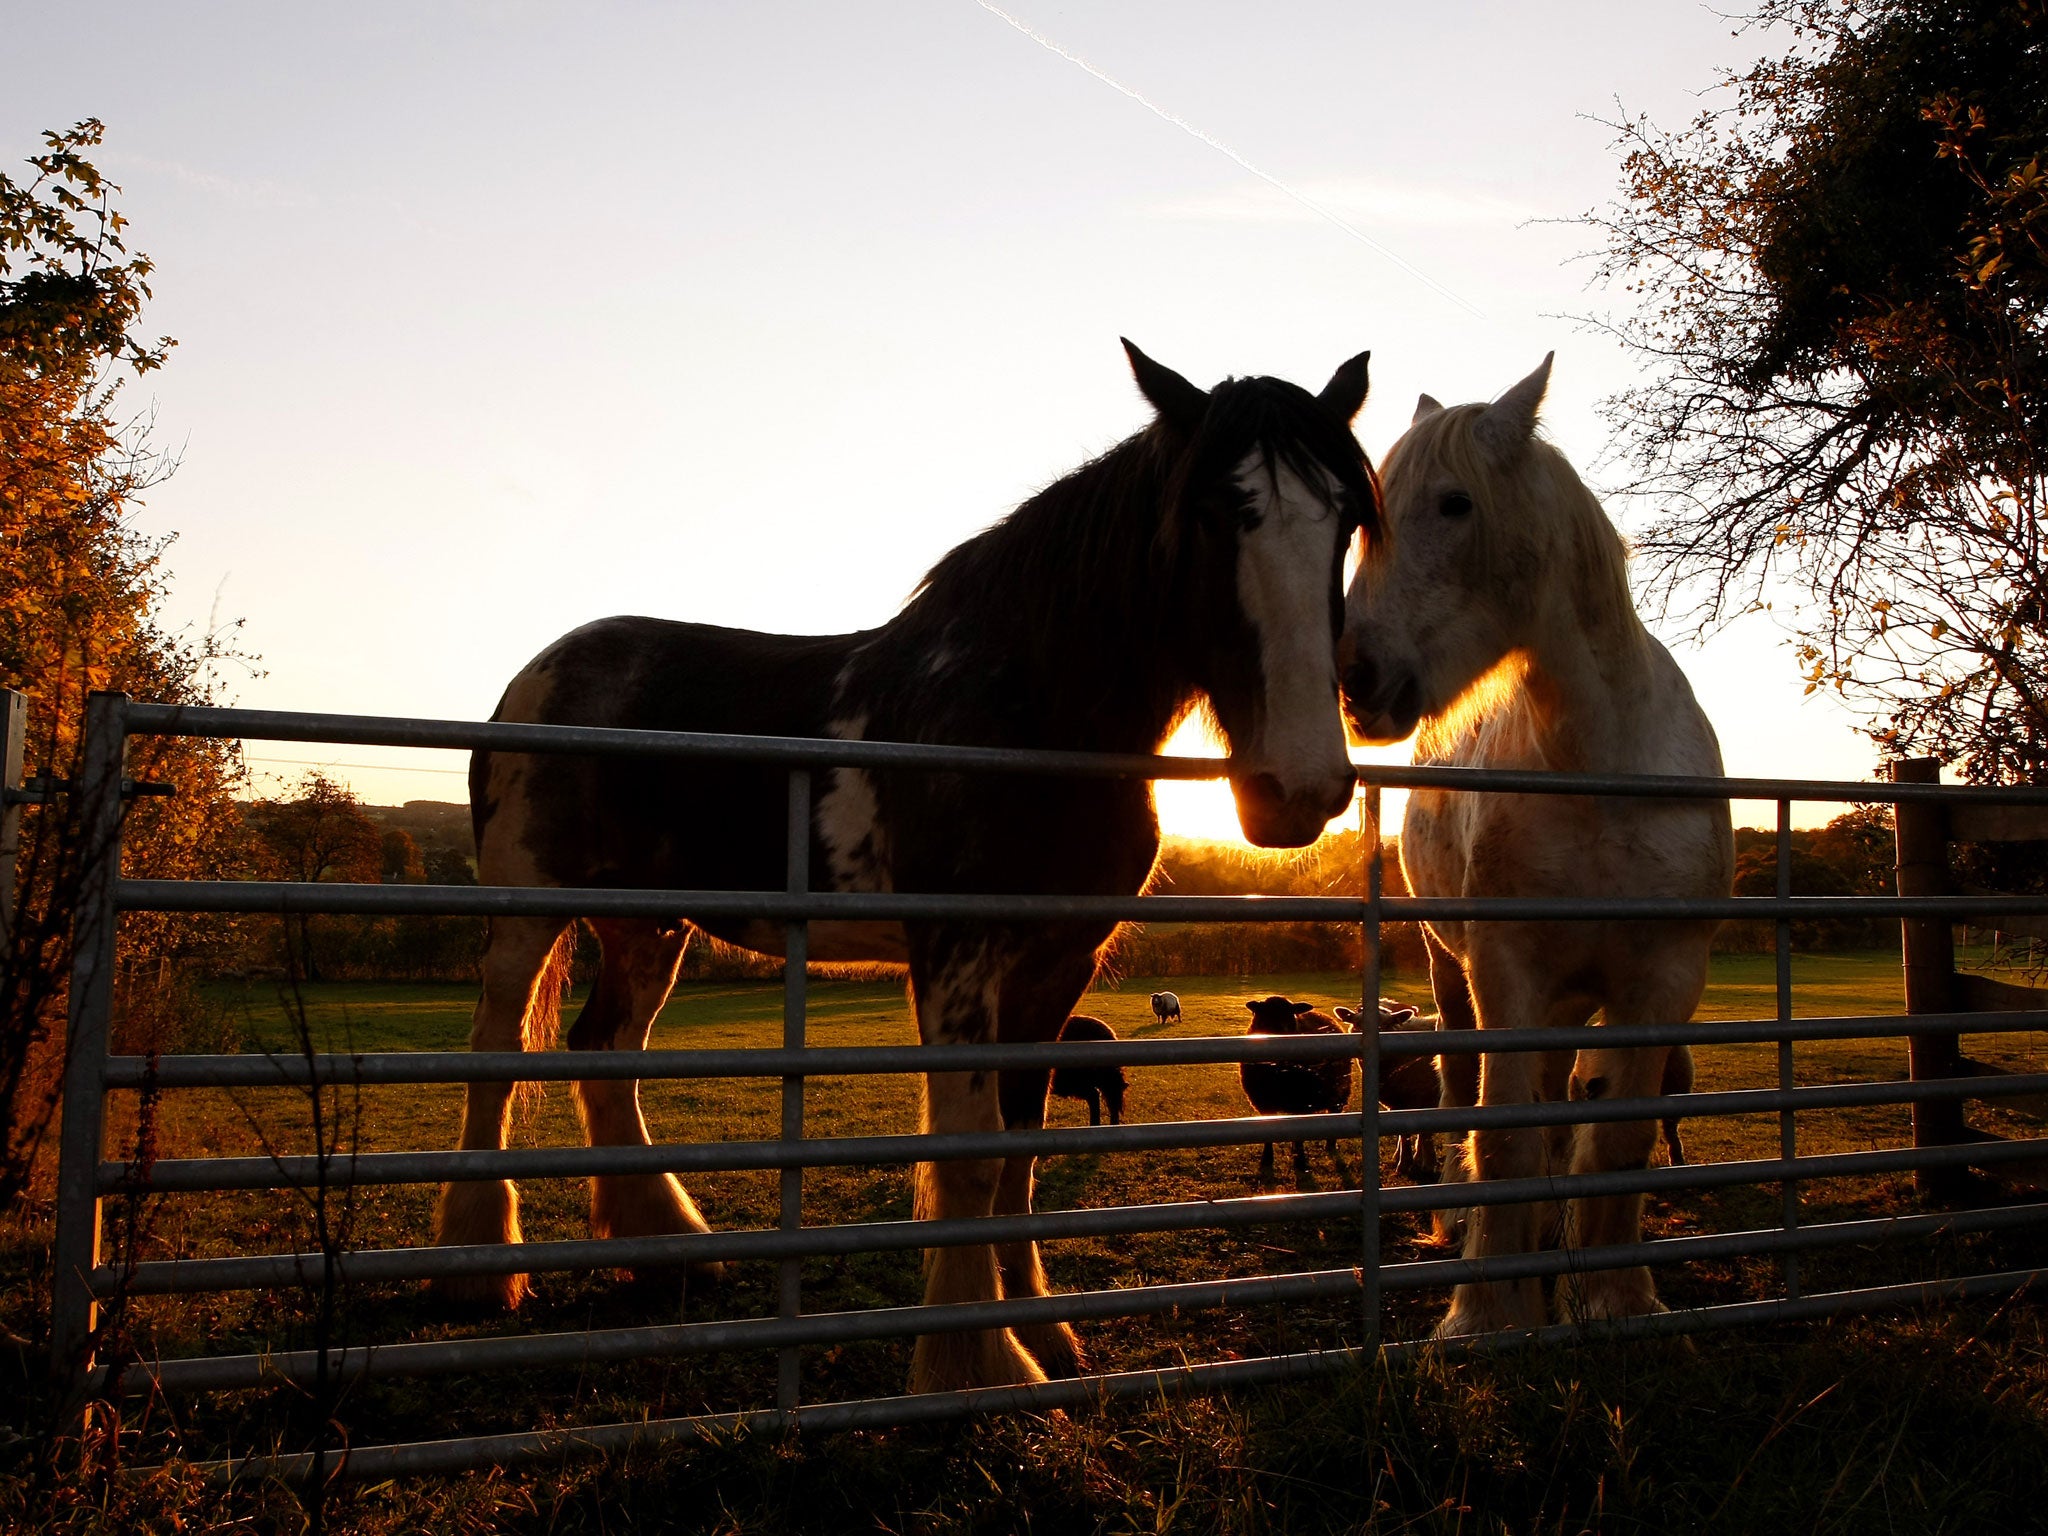 Horses stand in a field next to sheep as the sun sets in the Cotswolds on October 28, 2011 in Whittington, England.